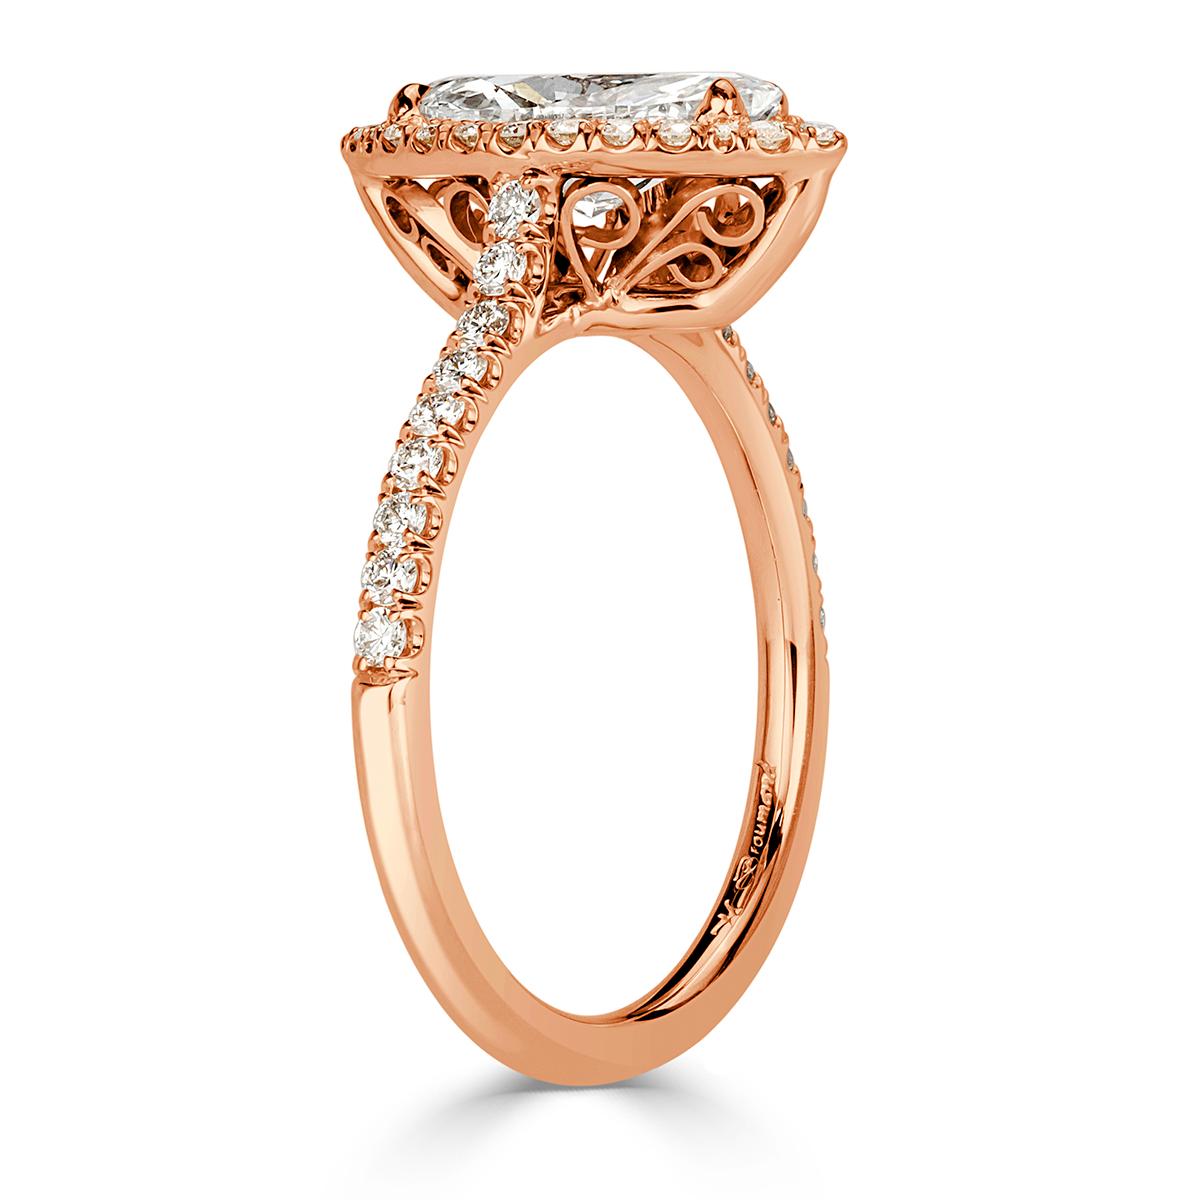 Custom created in 18k rose gold, this ravishing diamond engagement ring showcases an exquisite 1.14ct marquise cut center diamond, GIA certified at I-SI1. It is accented by a matching halo of round brilliant cut diamonds as well as one row of